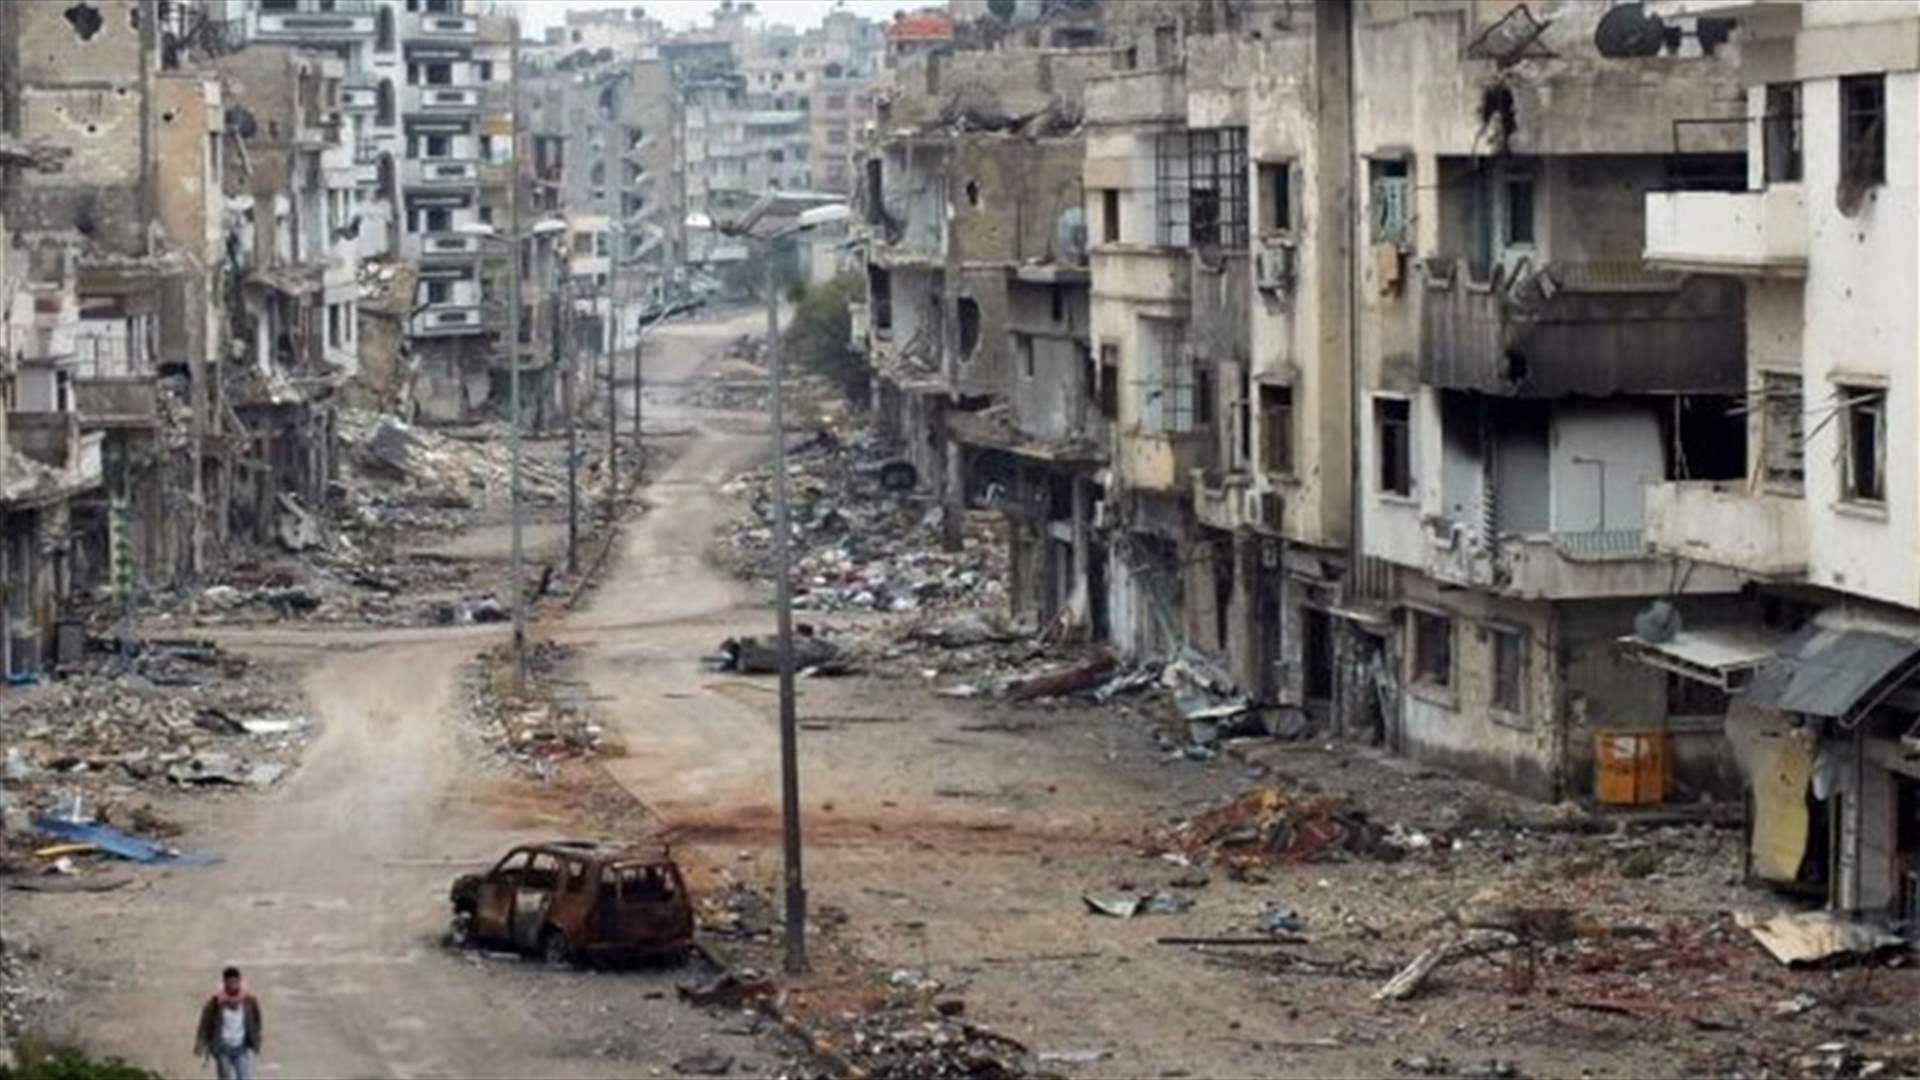 Eventual rebuilding of Syria will be challenged by cheap oil -World Bank